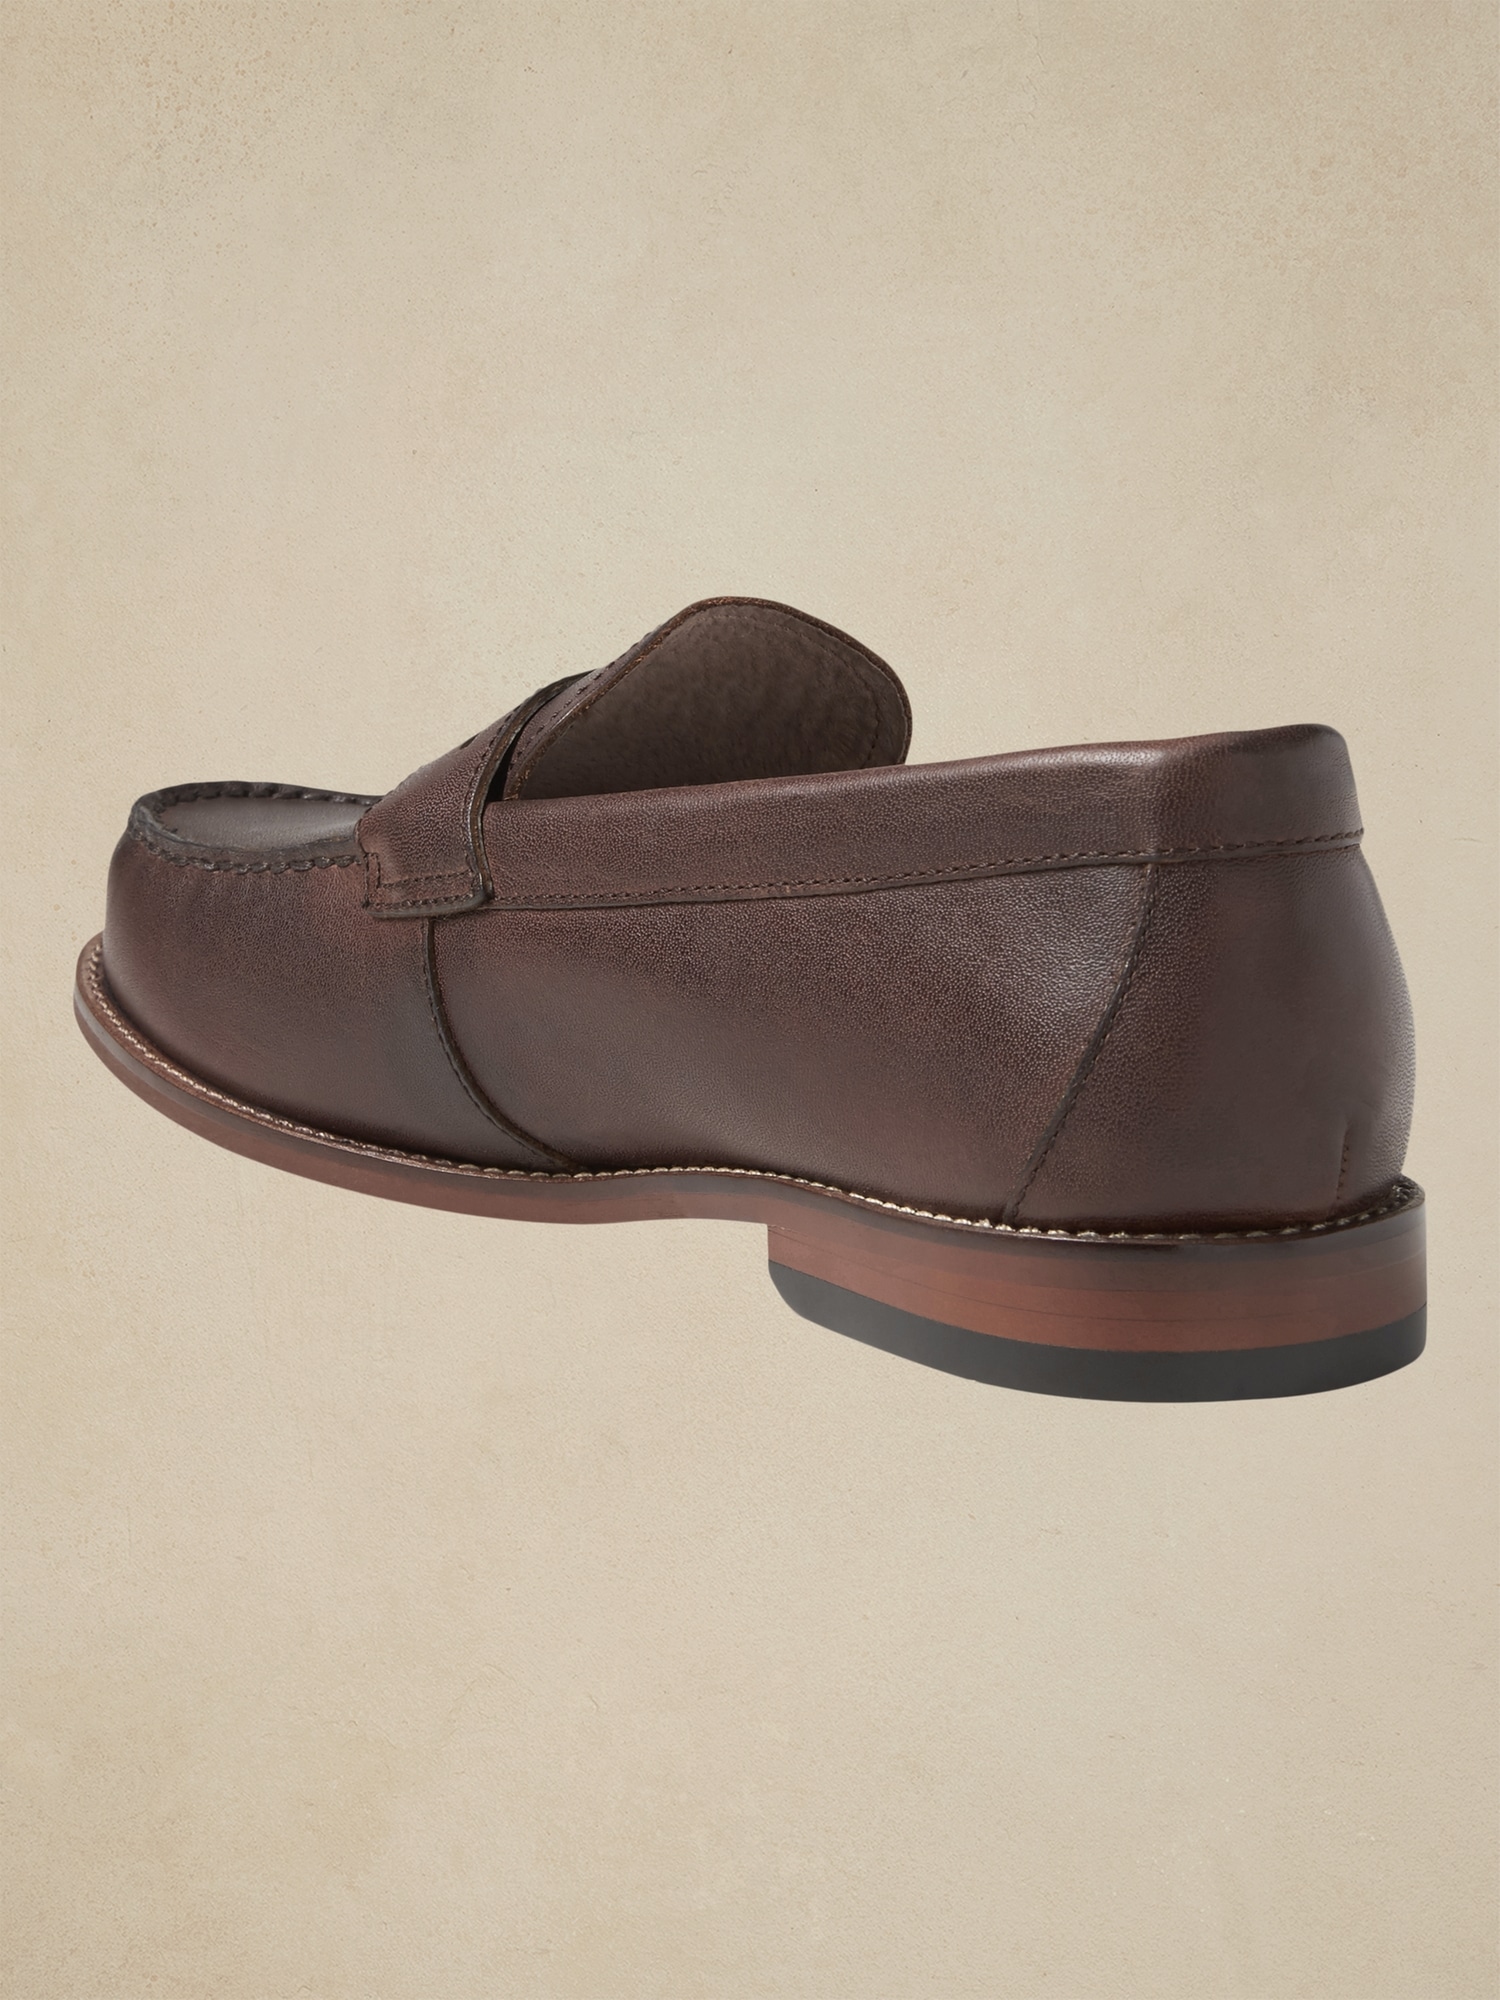 Ralston Loafer